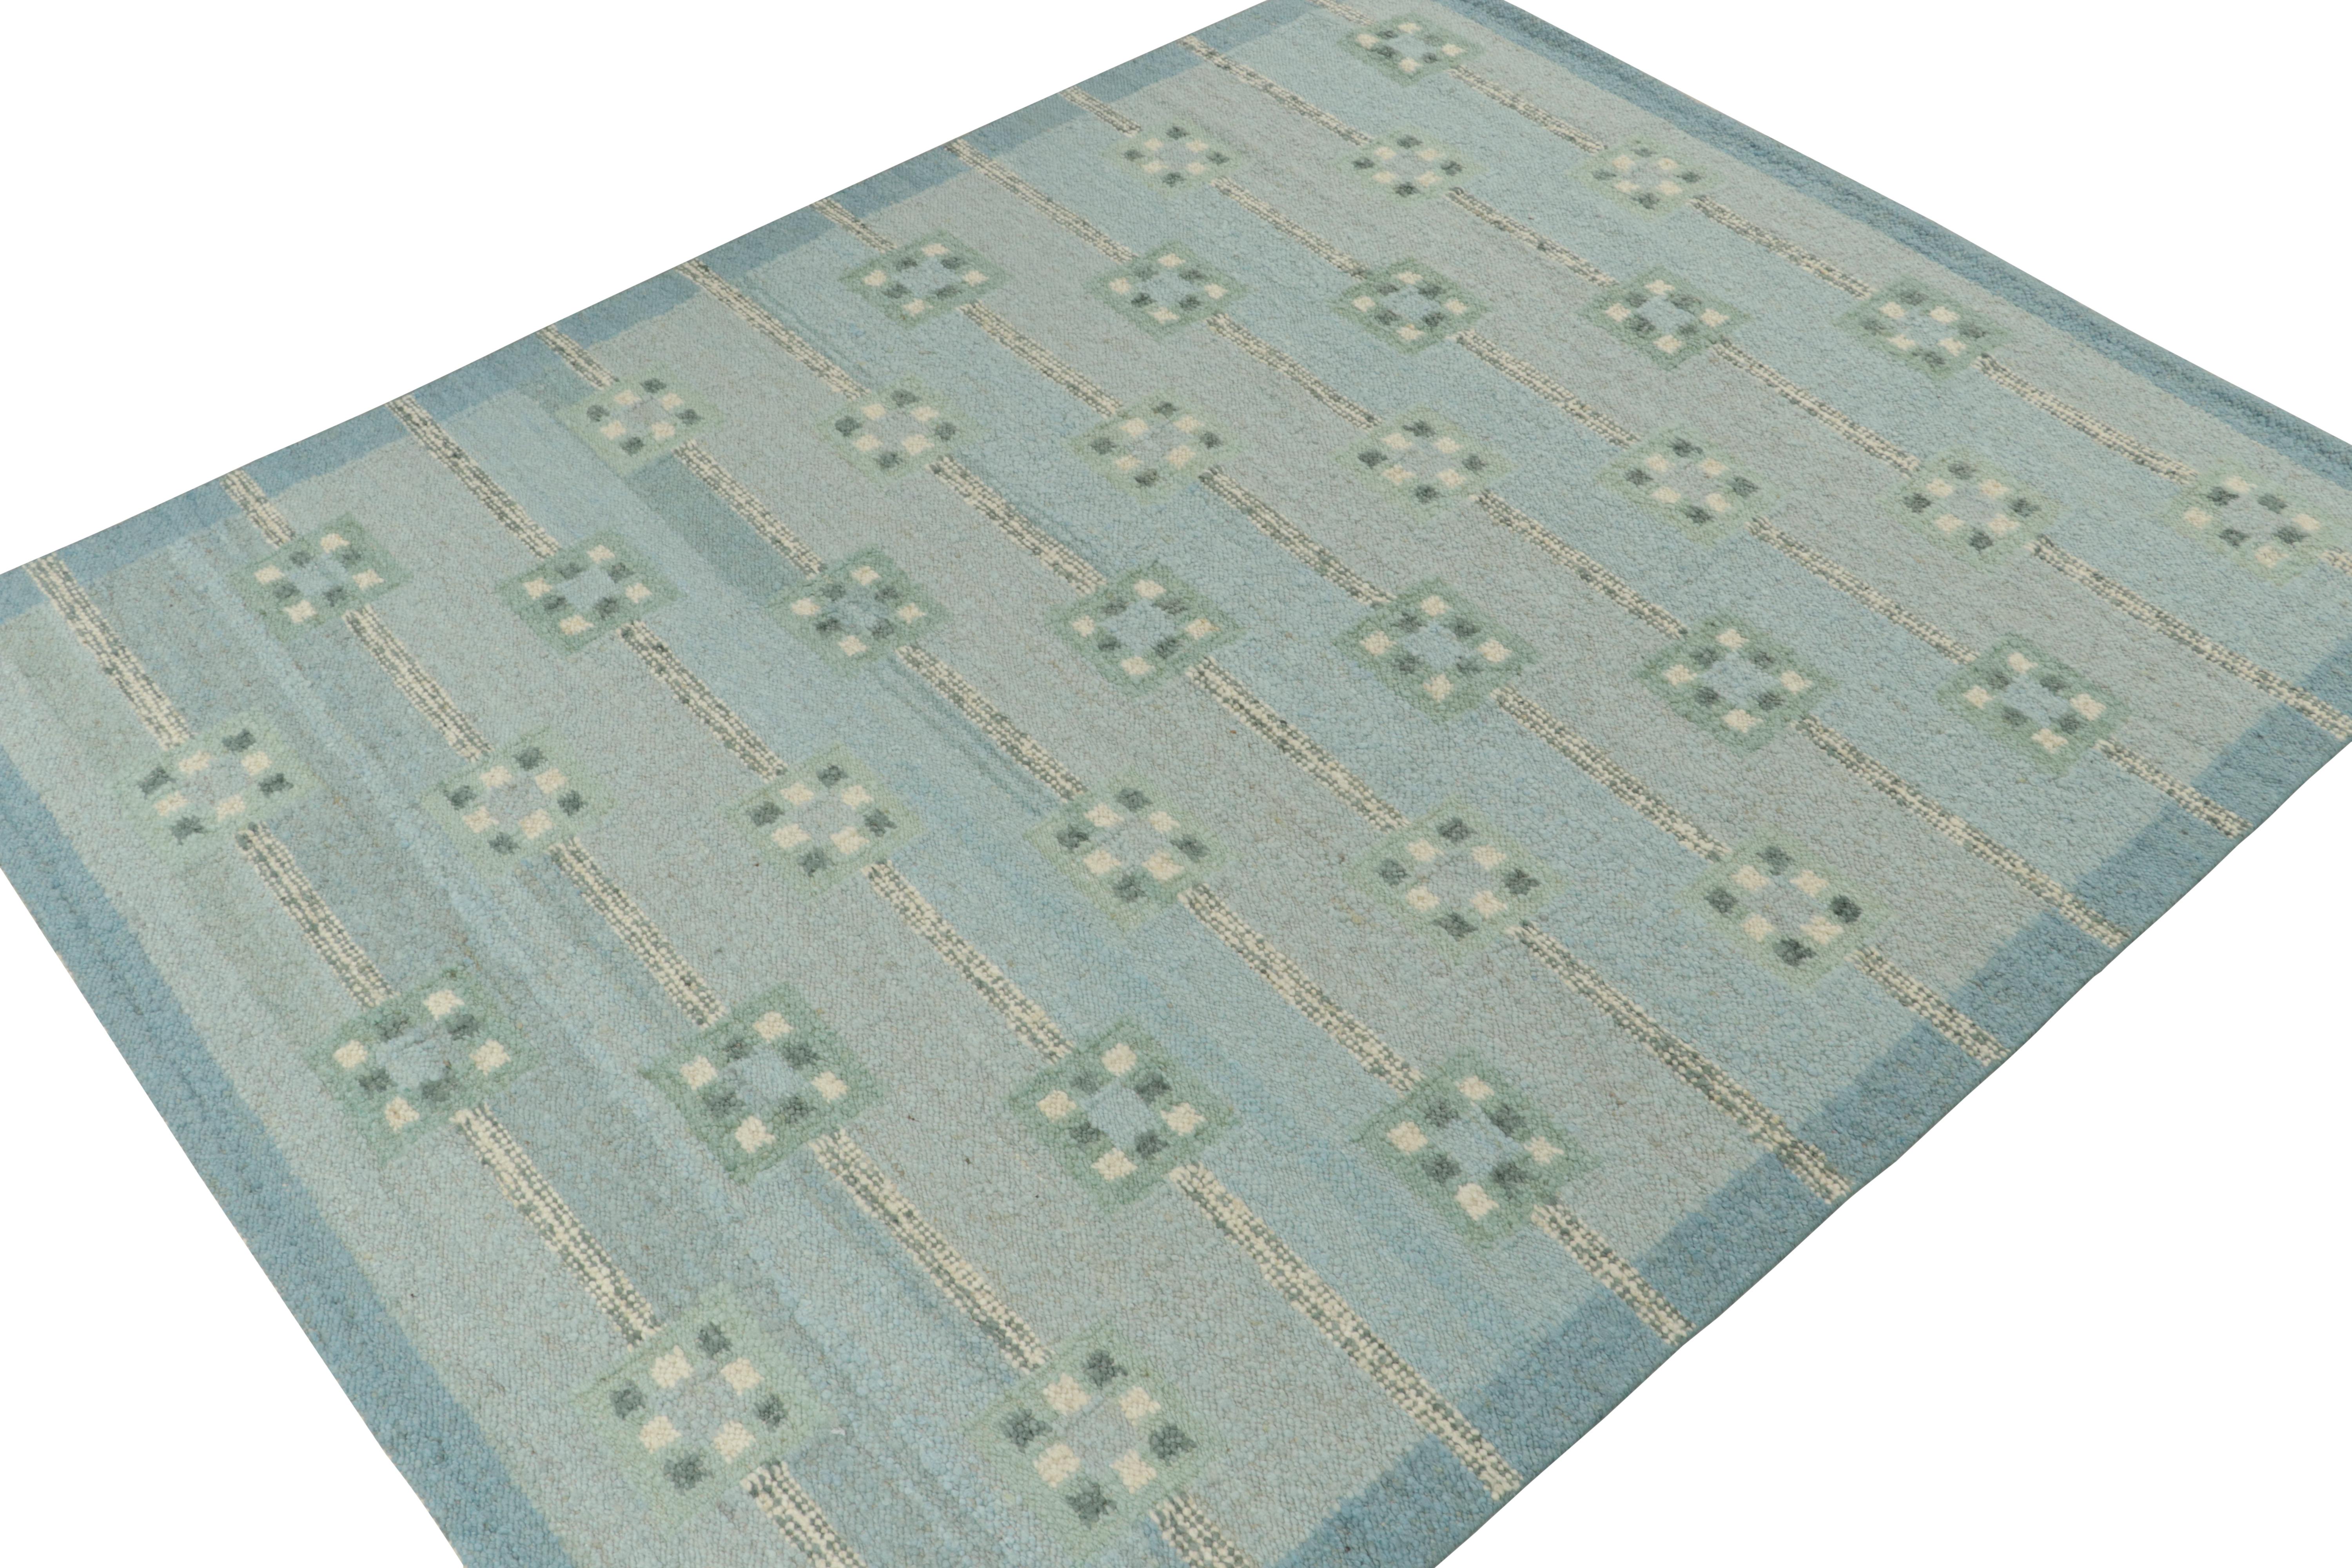 This 10x12 Swedish style kilim is from the inventive “Nu” texture in Rug & Kilim’s award-winning Scandinavian flat weave collection. Handwoven in wool. 

Further On the Design: 

This rug enjoys a boucle-like texture of blended yarns, and a look